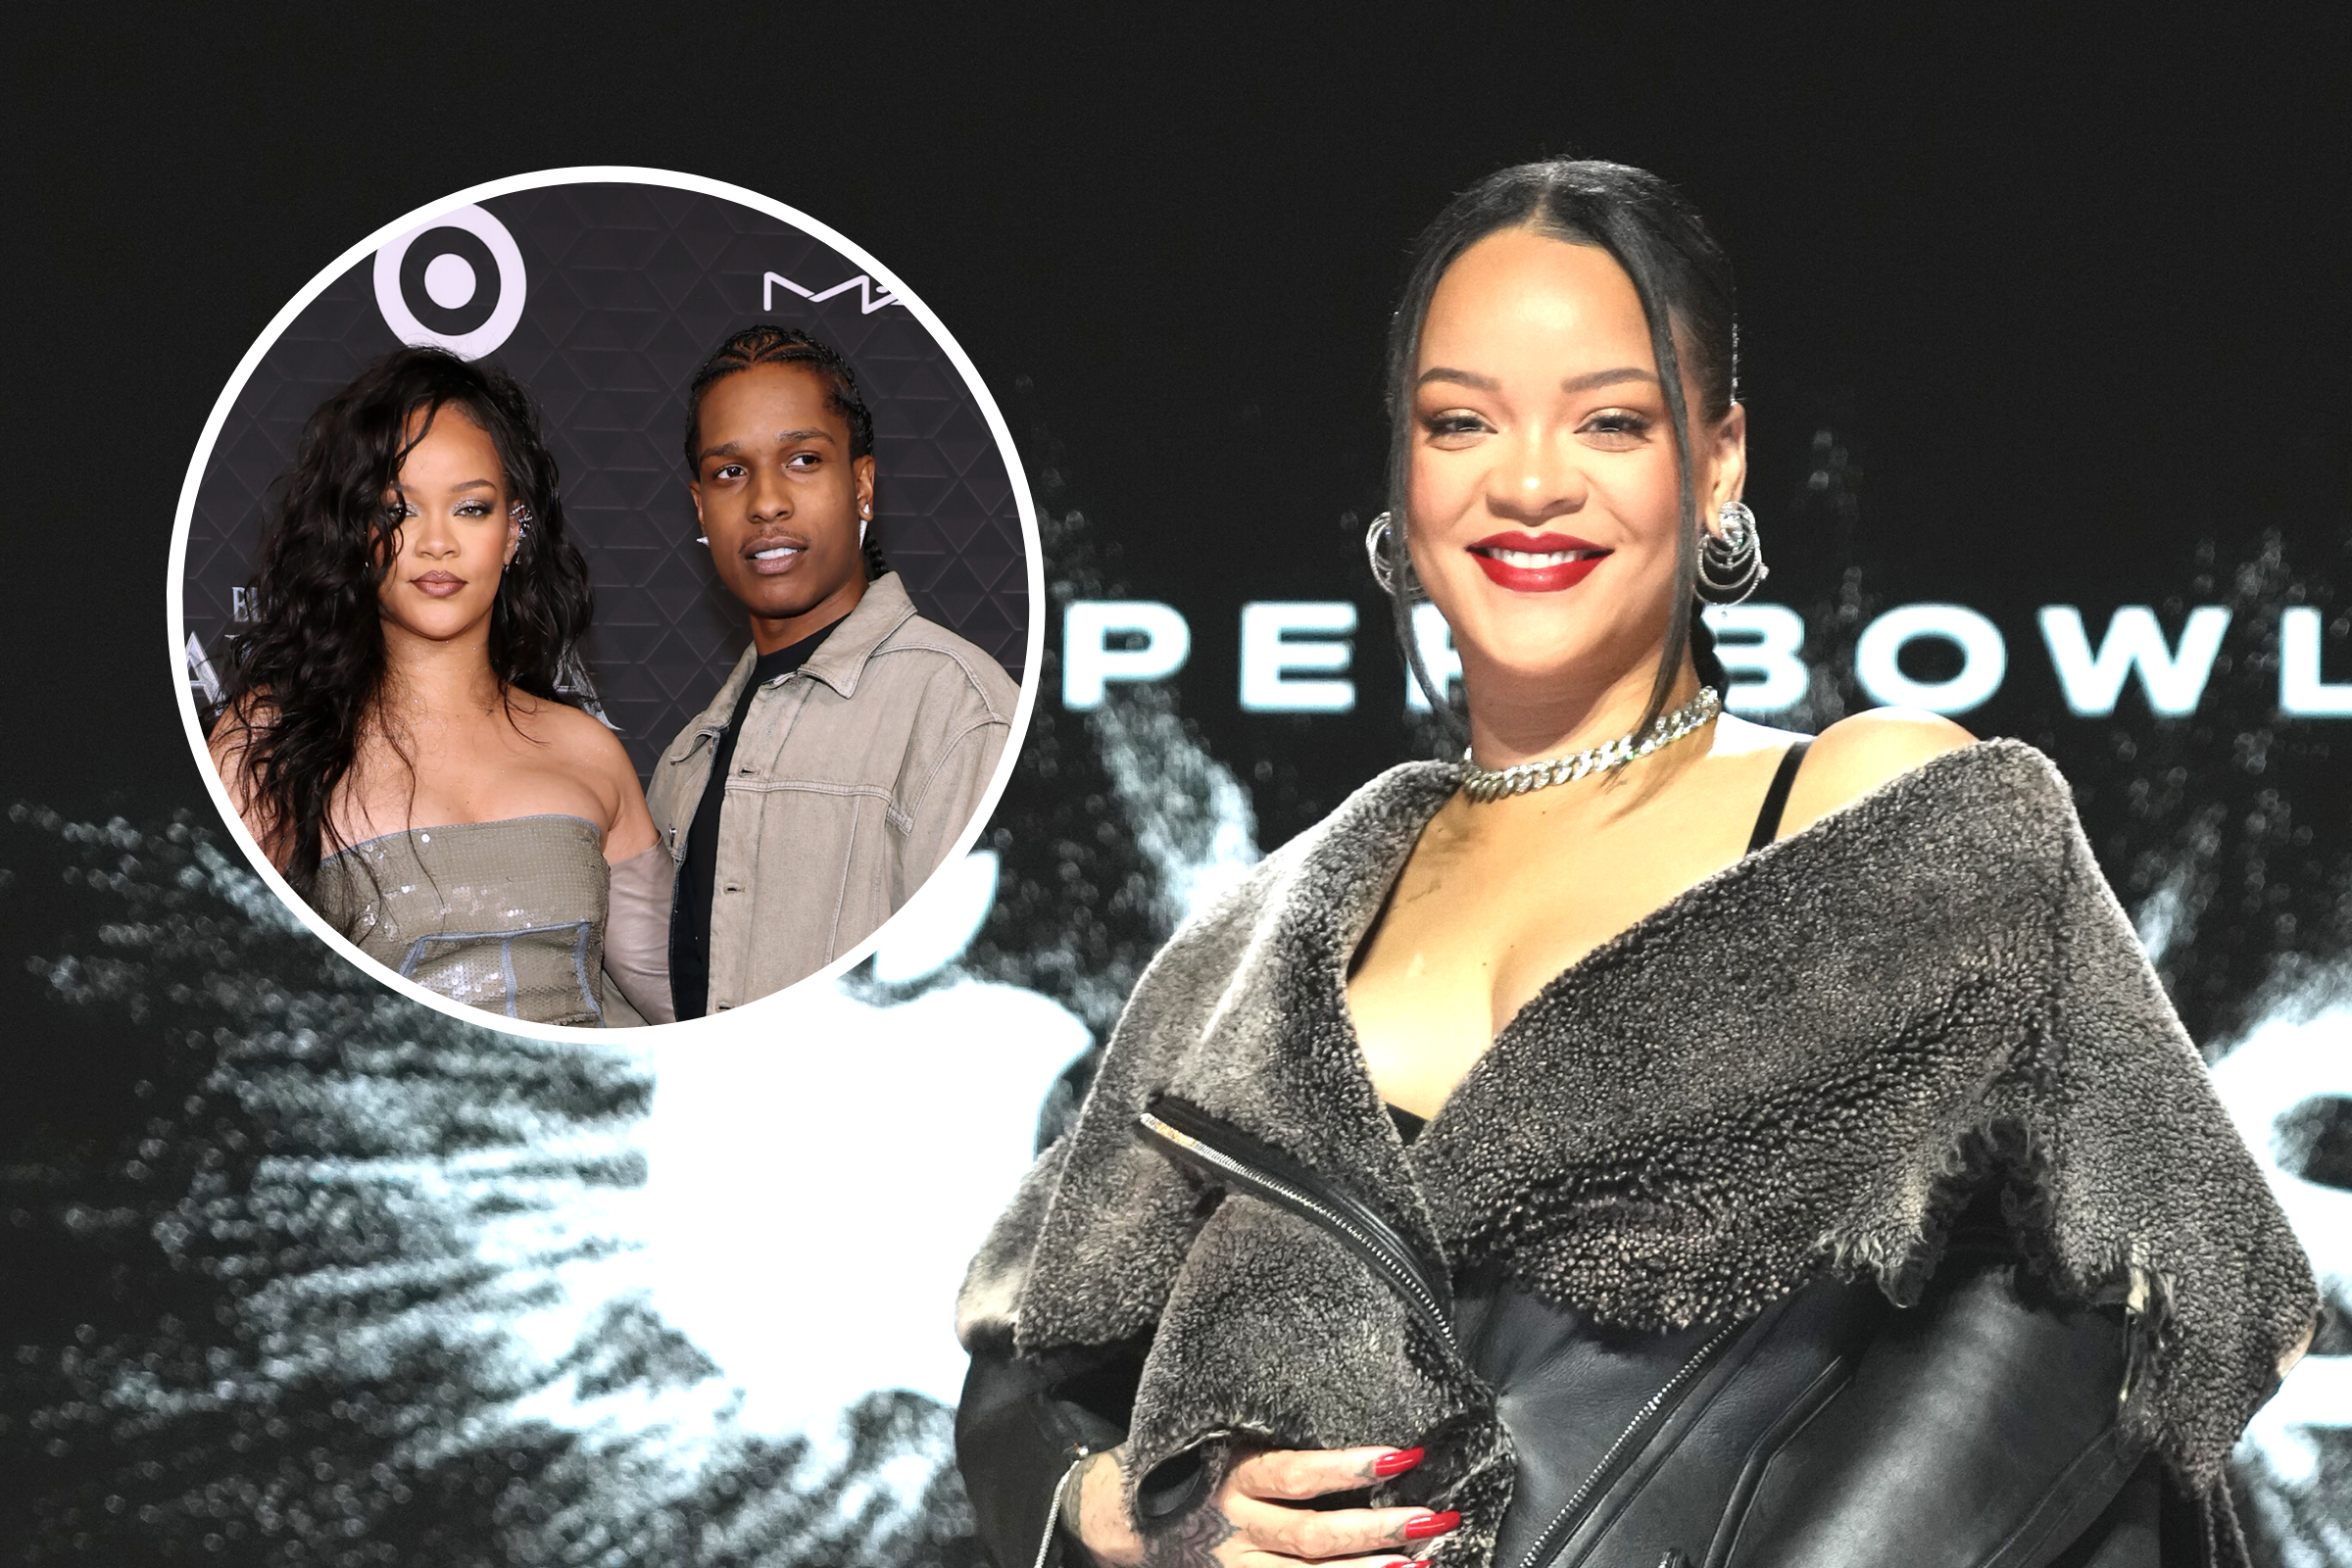 2020 Is All About The Business Bag For Rihanna